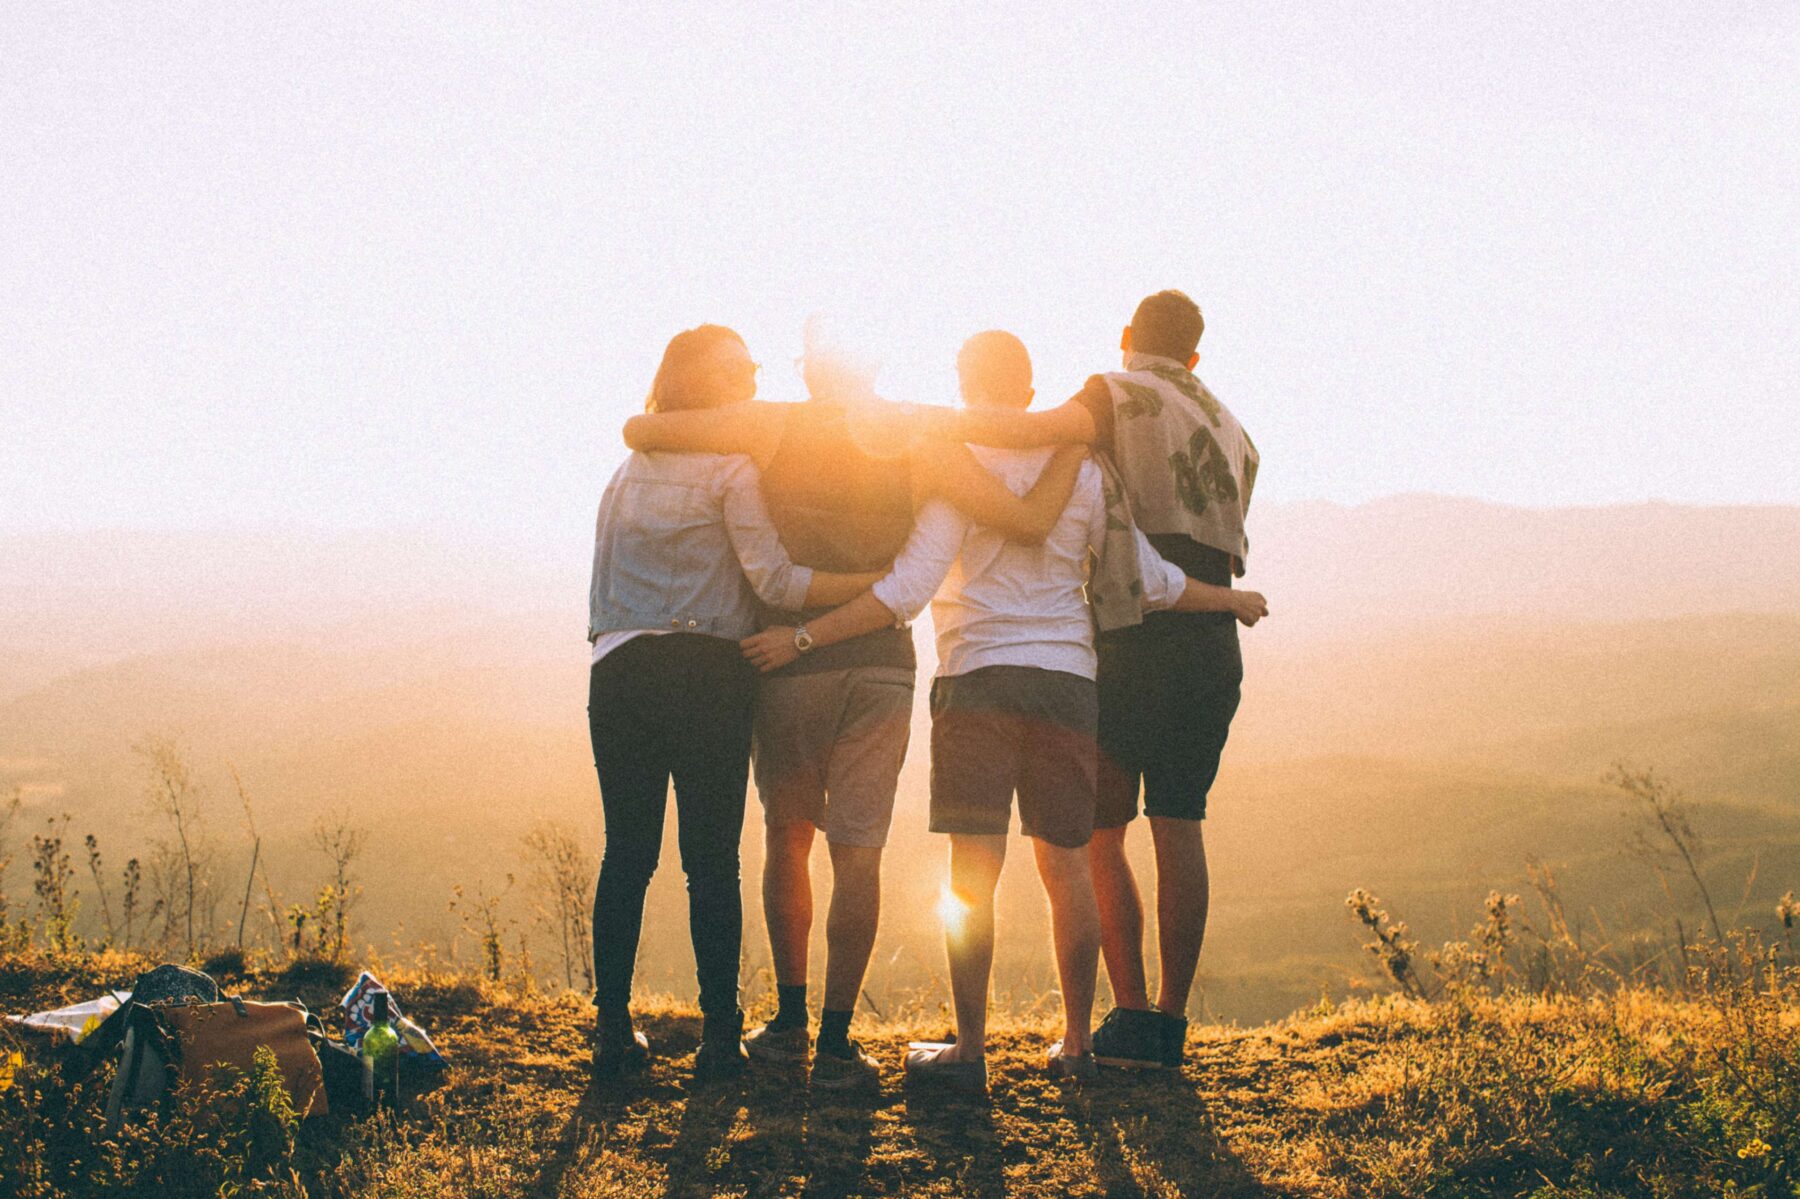 group of friends holding each other in a hug looking at a sunset